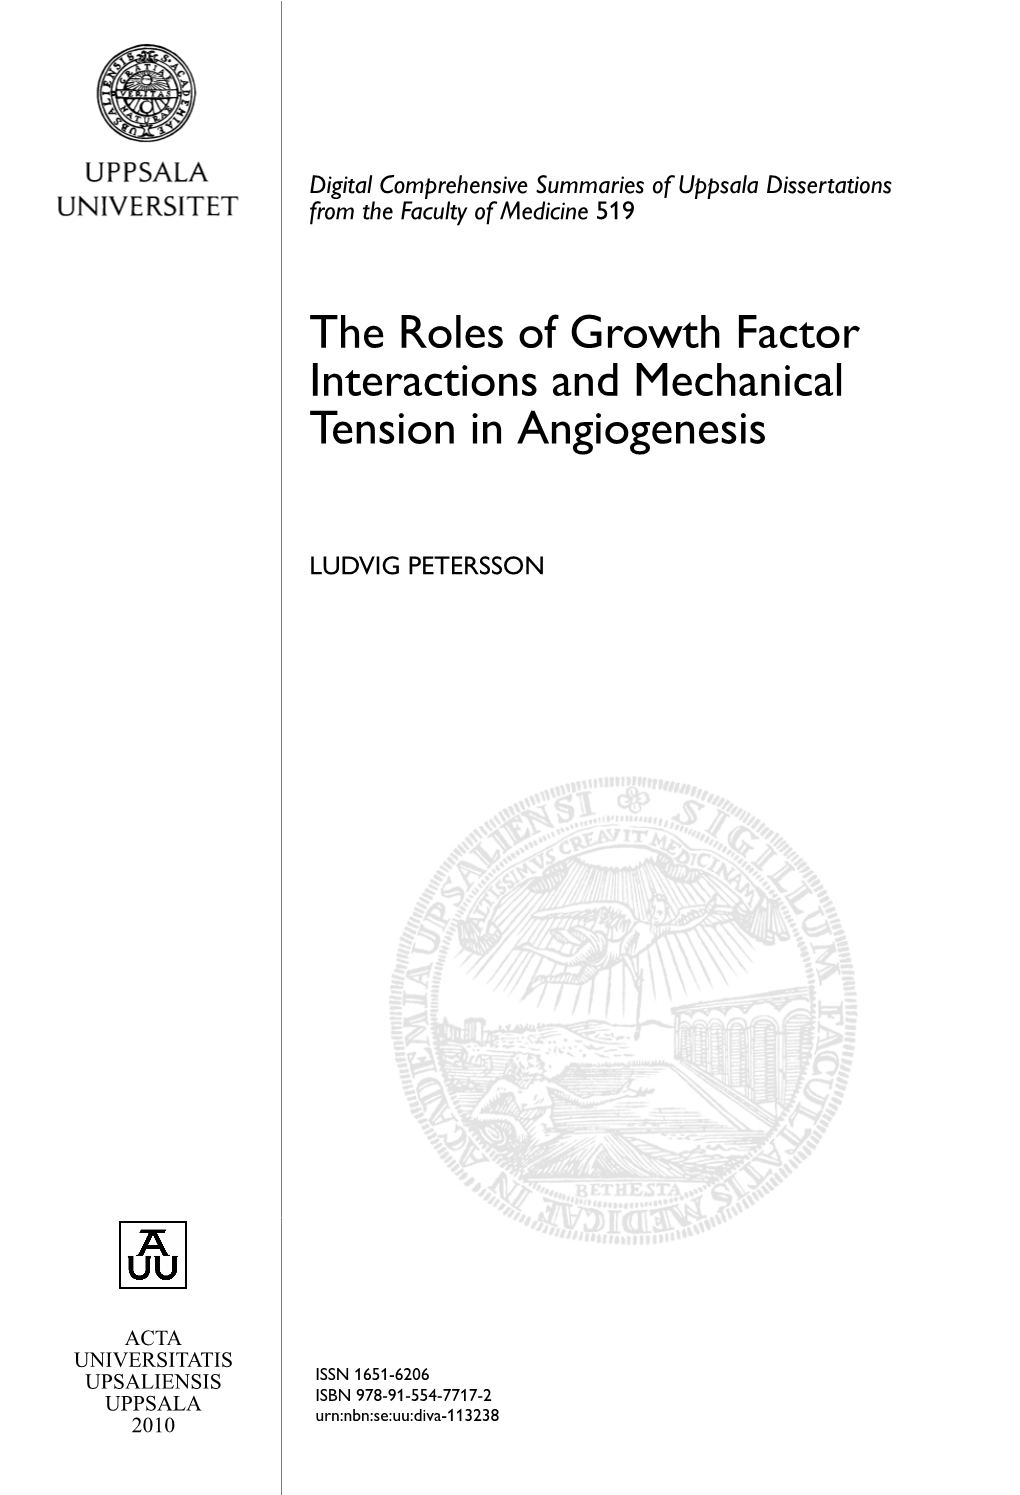 The Roles of Growth Factor Interactions and Mechanical